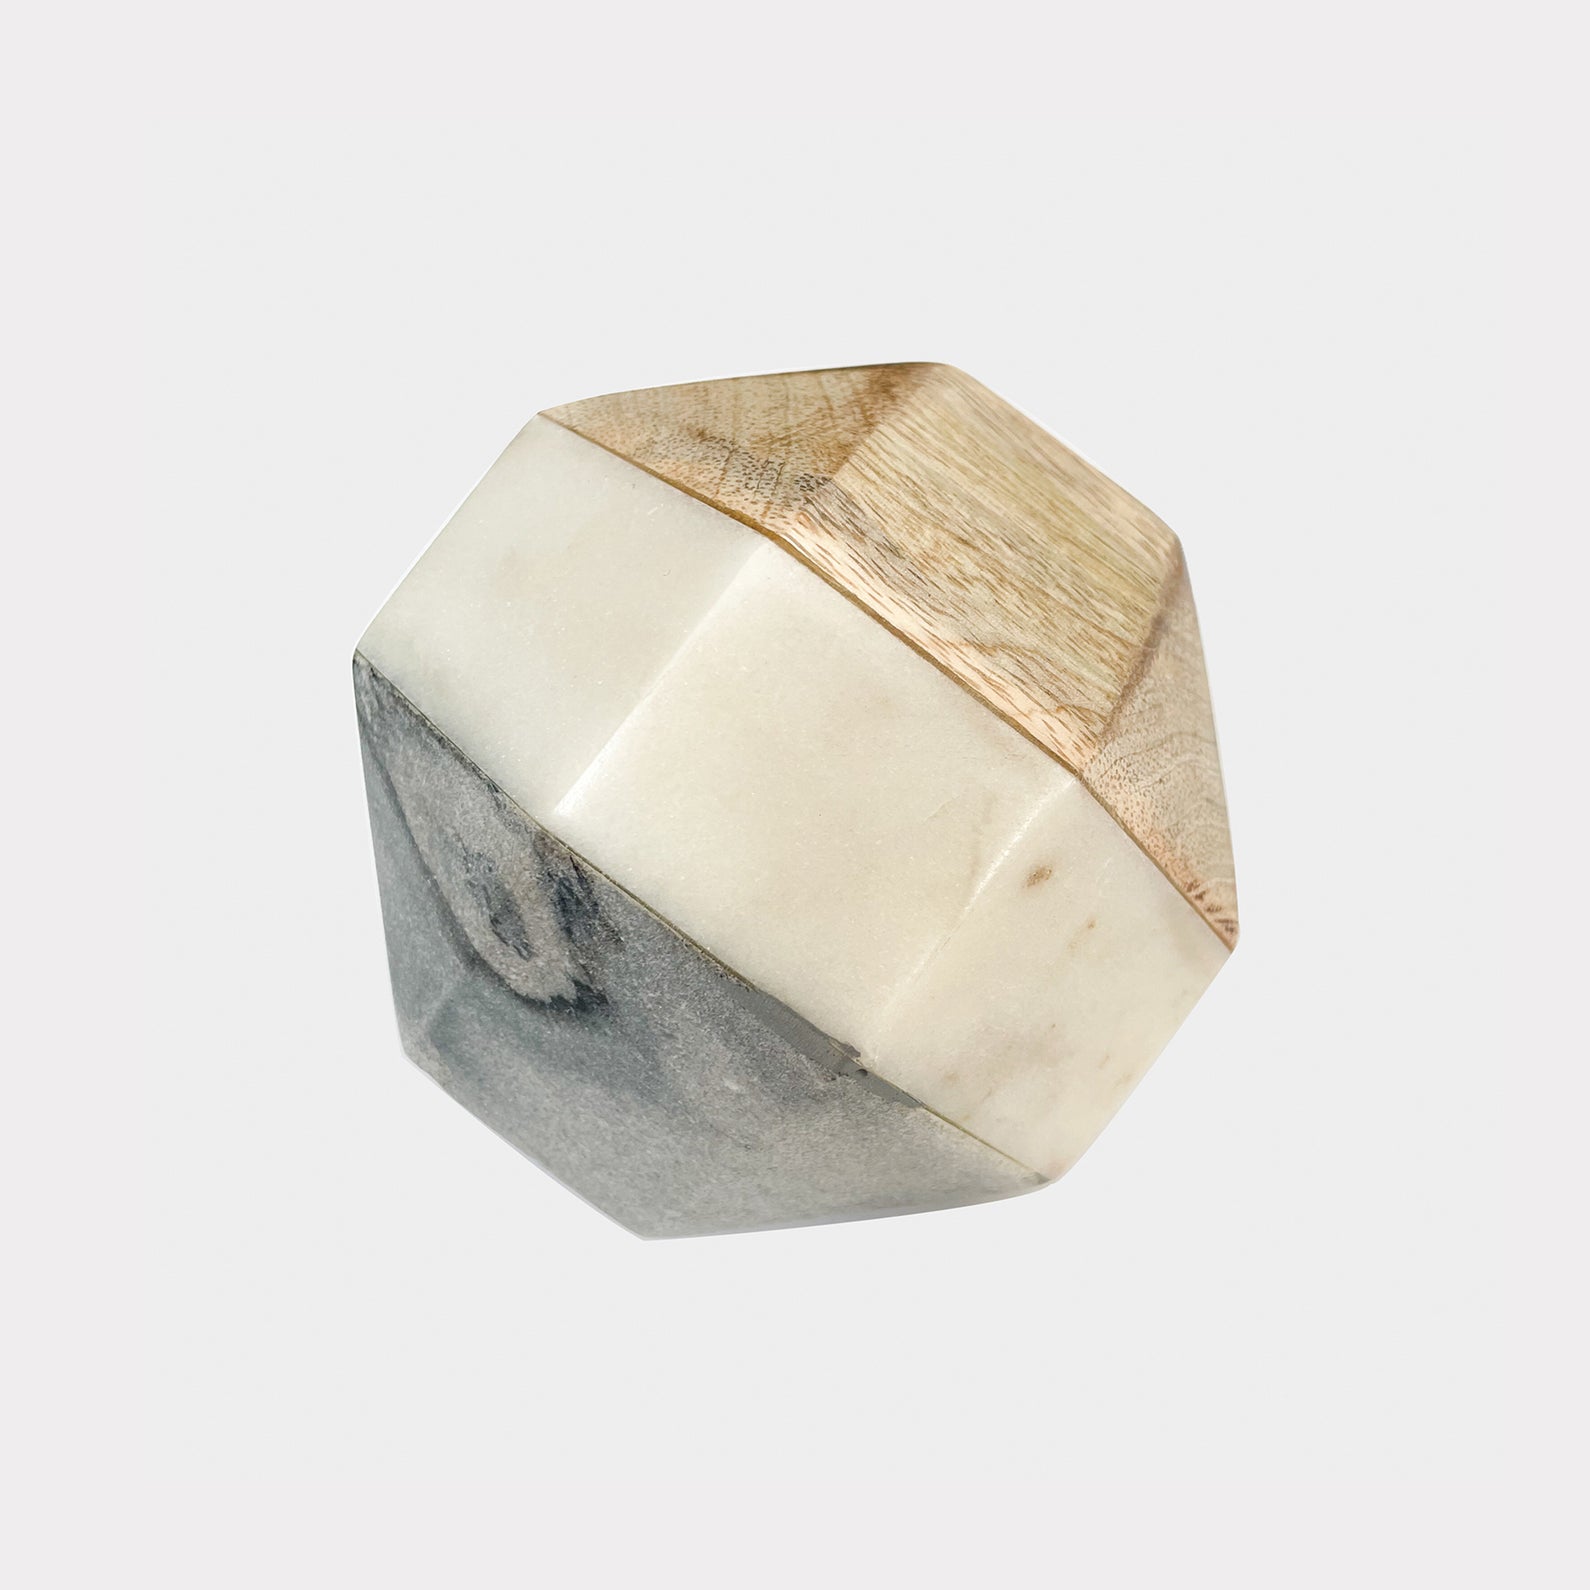 HAYES MARBLE WOOD HEXAGON OBJECT